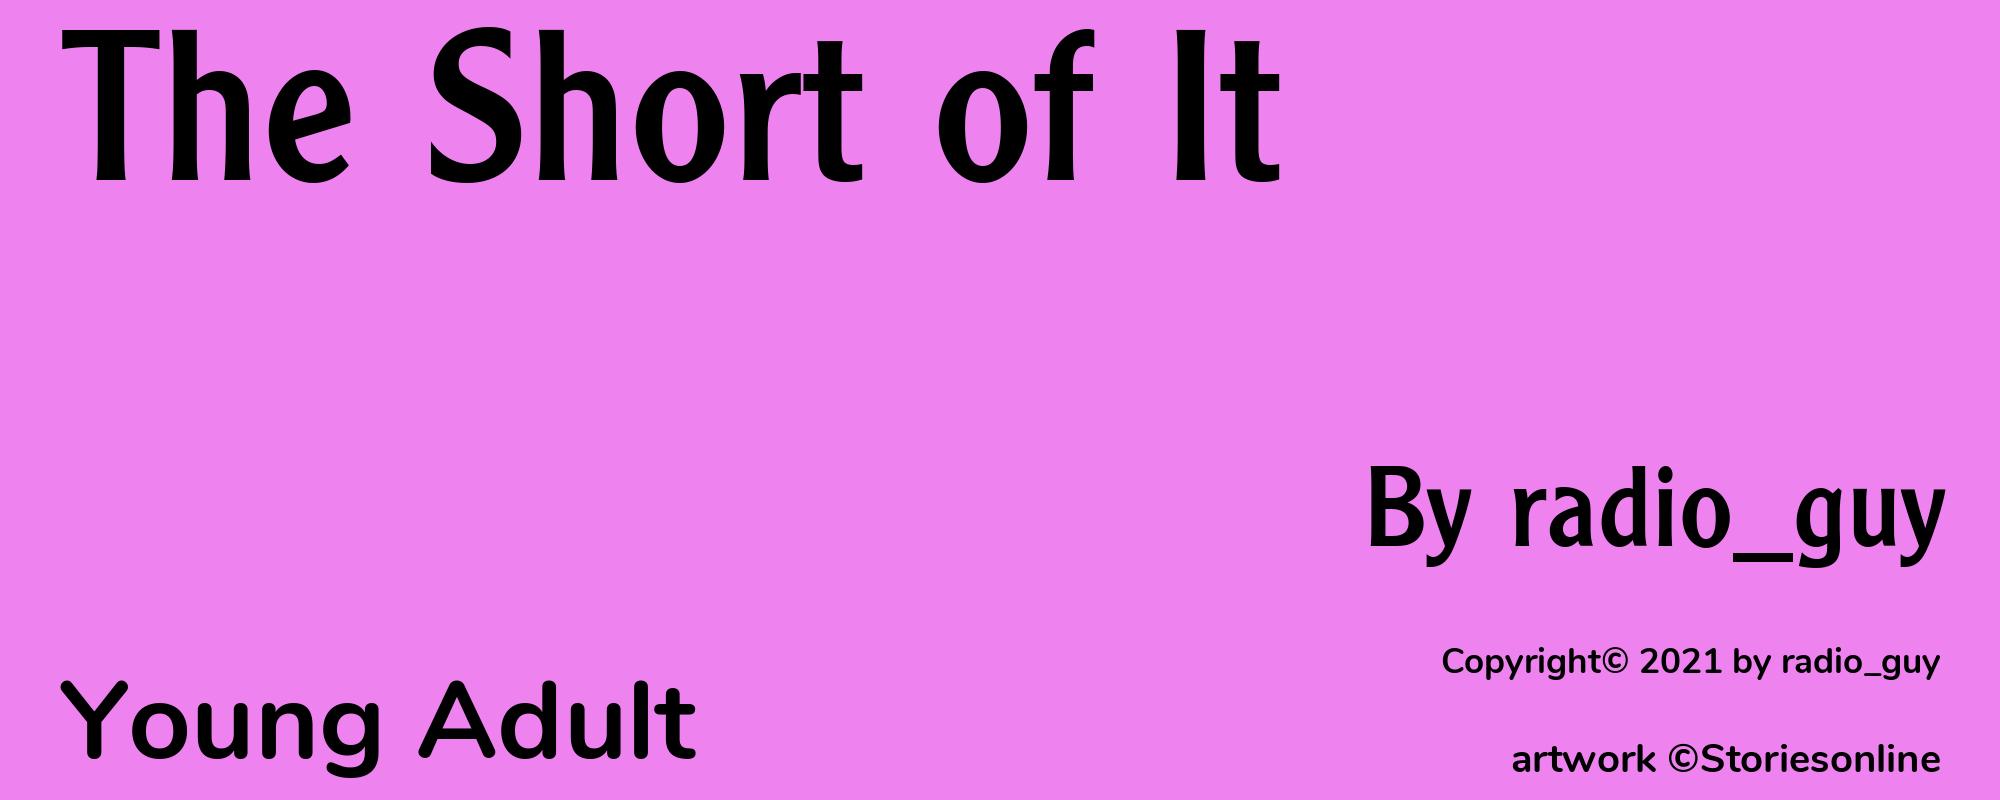 The Short of It - Cover